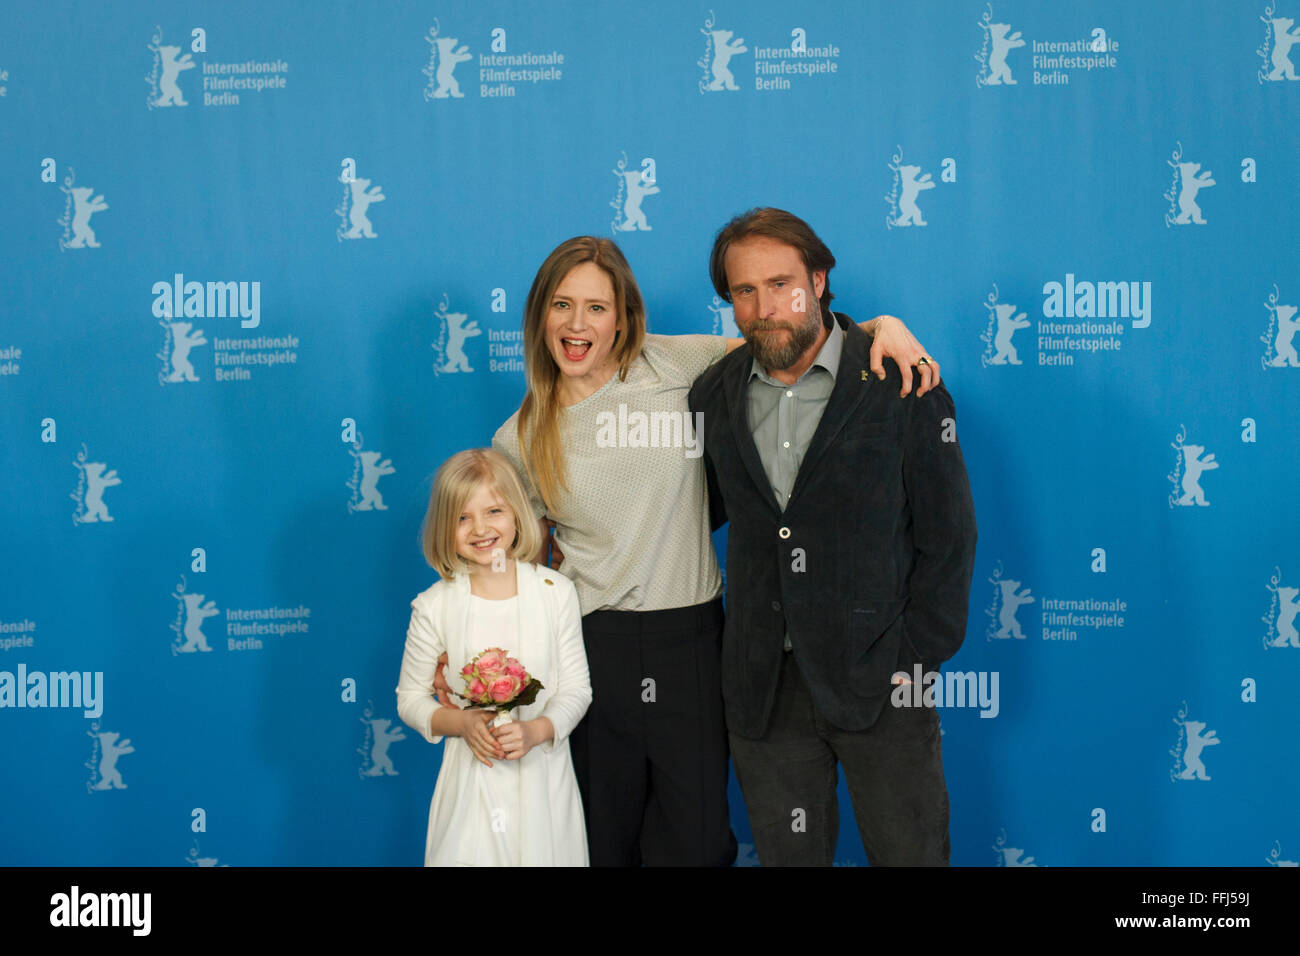 Berlin, Germany. 14th February, 2016. Actresses Emilia Pieske, Julia Jentsch and actor Bjarne Maedel attend the '24 Wochen' photo call during the 66th Berlinale International Film Festival Berlin Credit:  Odeta Catana/Alamy Live News Stock Photo